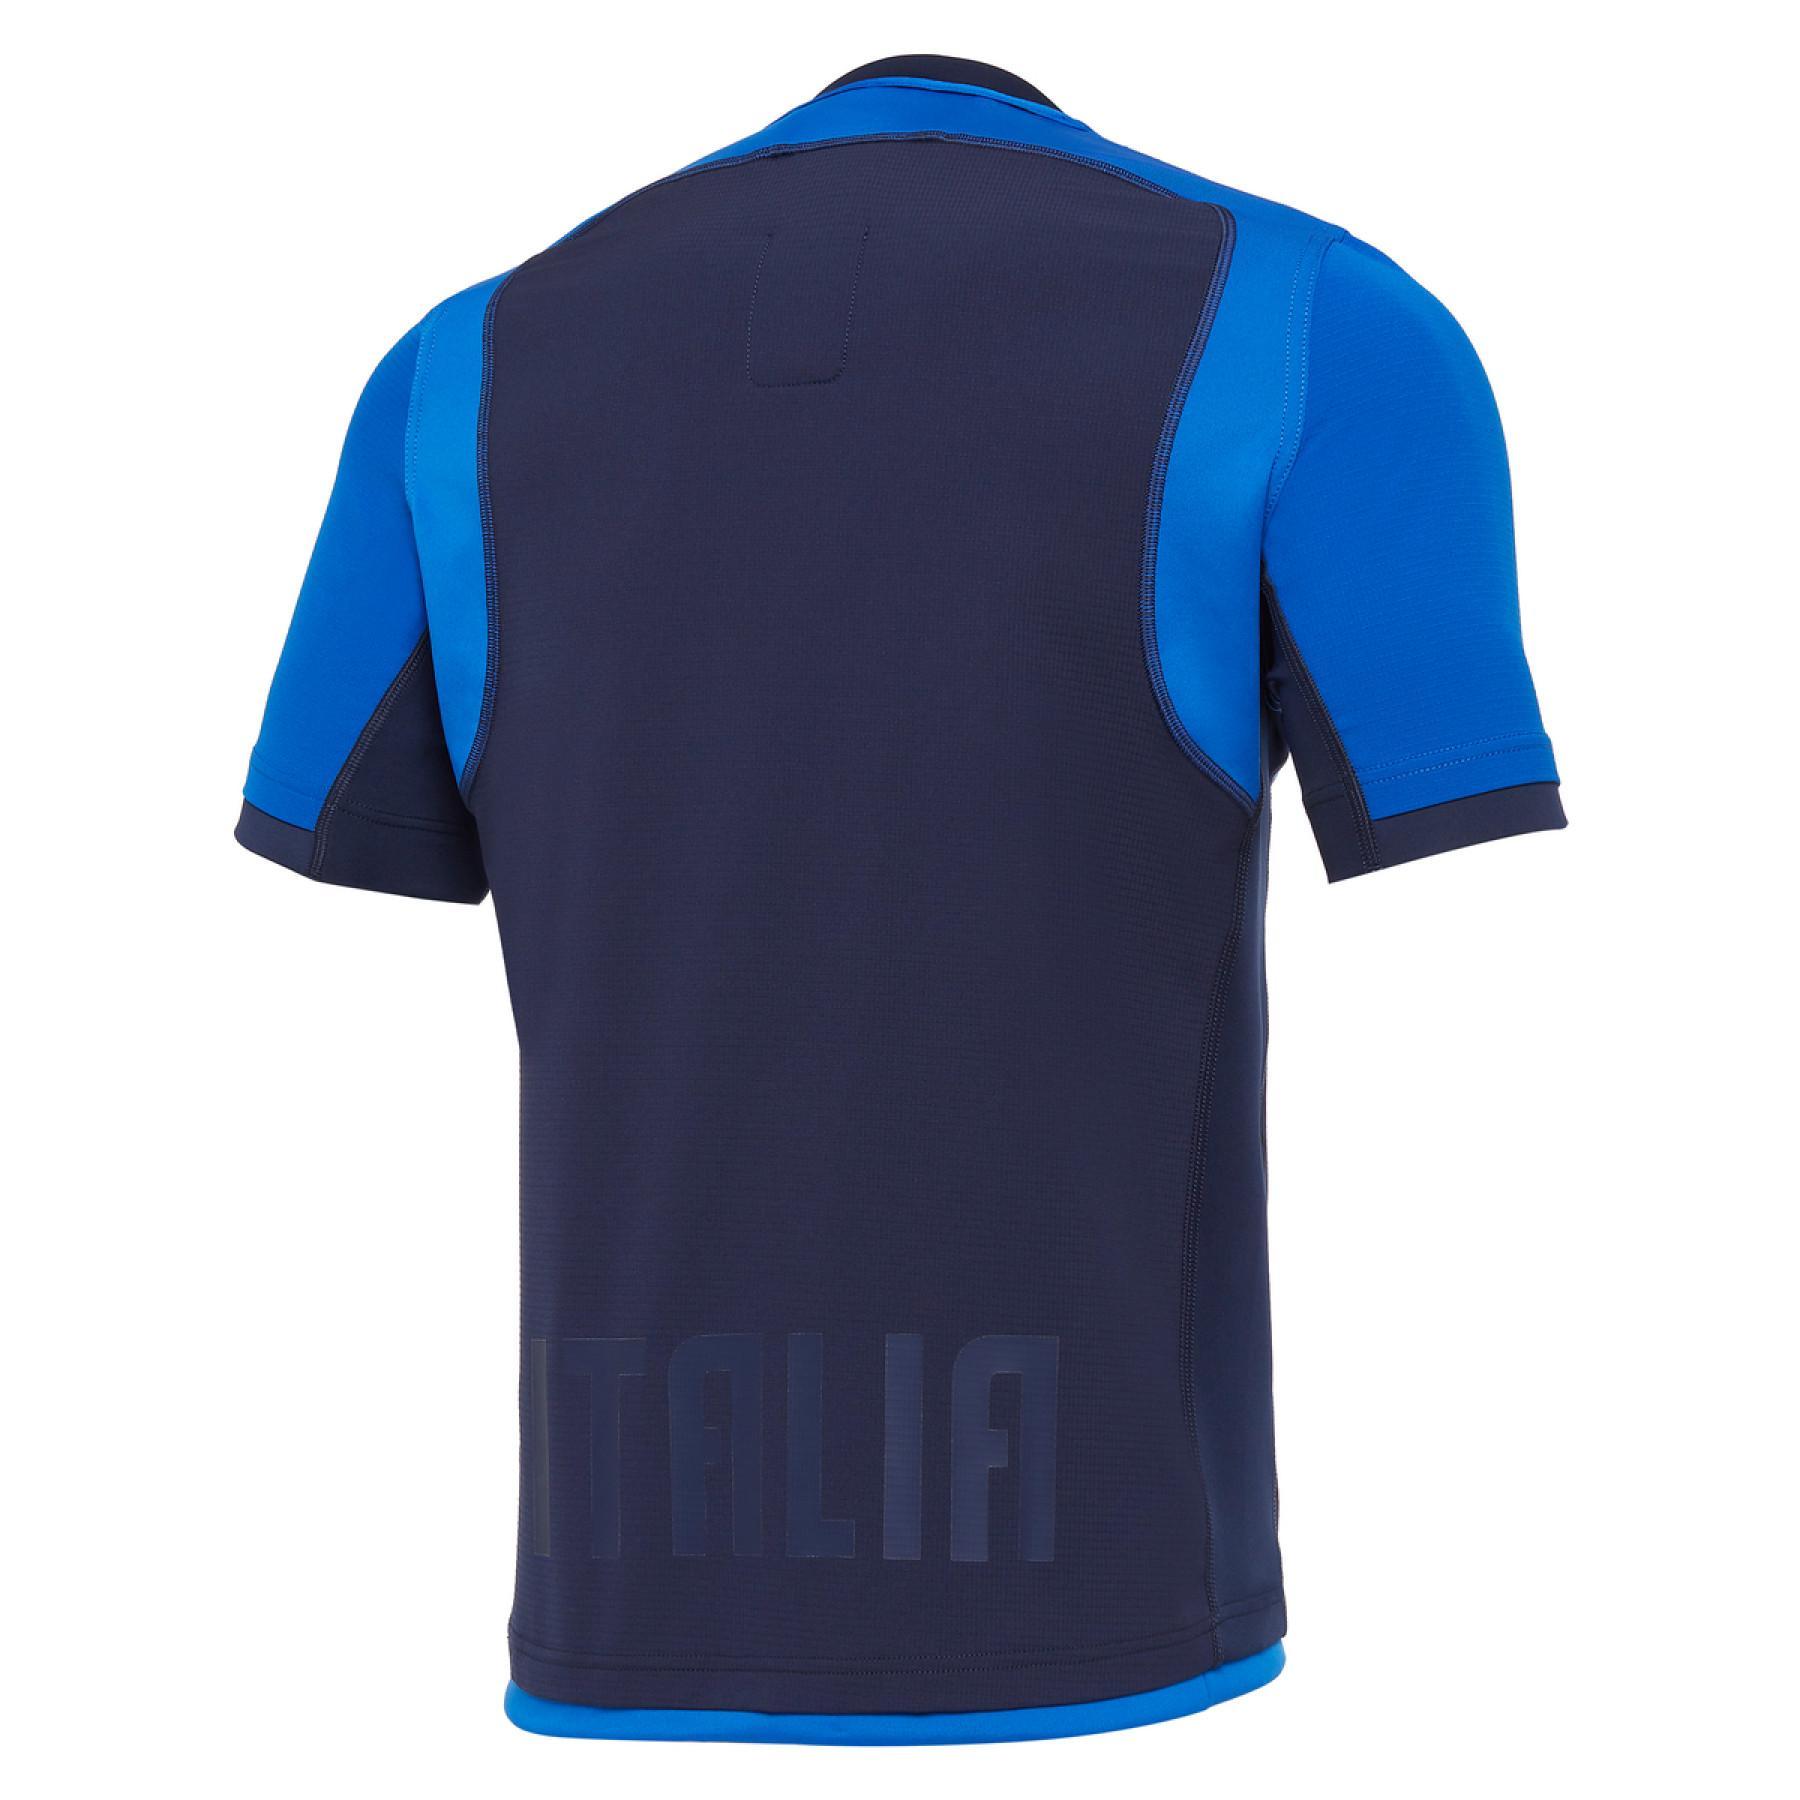 Maillot Italie rugby 2020/21